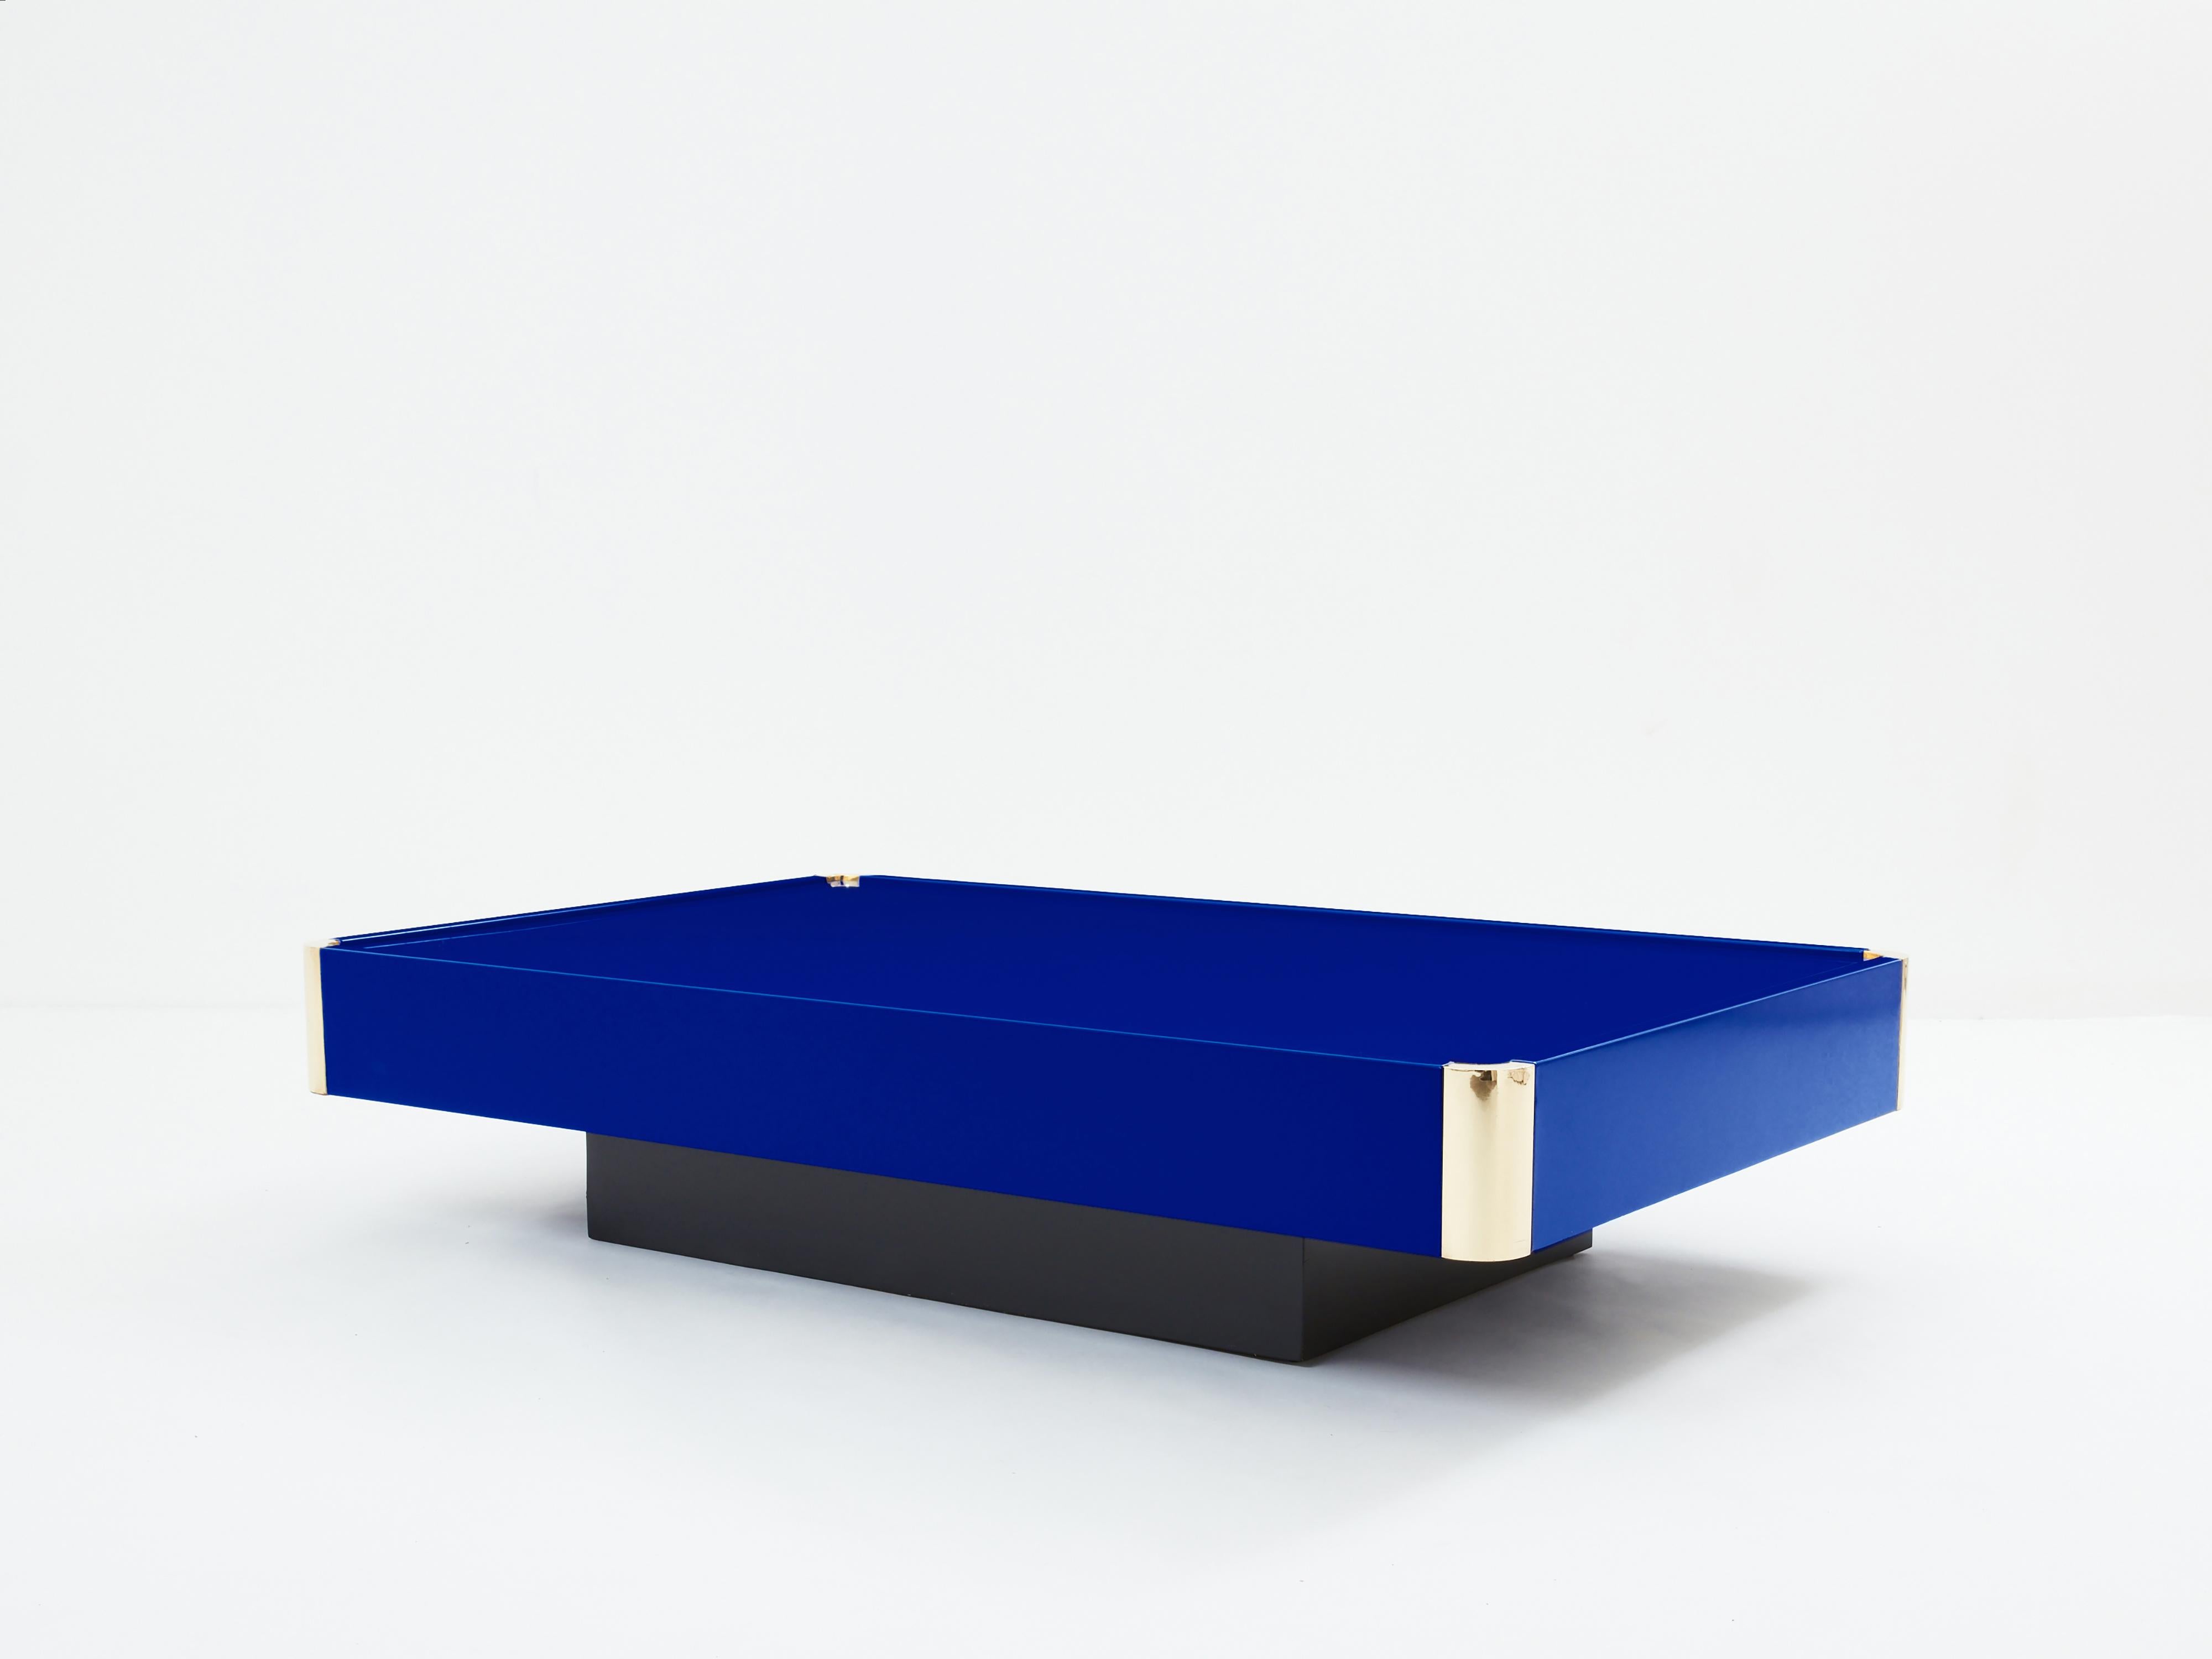 This stunning coffee table is guaranteed to be the focus of attention when you entertain guests in your living room. Following the glamorous mid-century look of other classic Willy Rizzo designs, this Majorelle blue lacquered table, attributed to